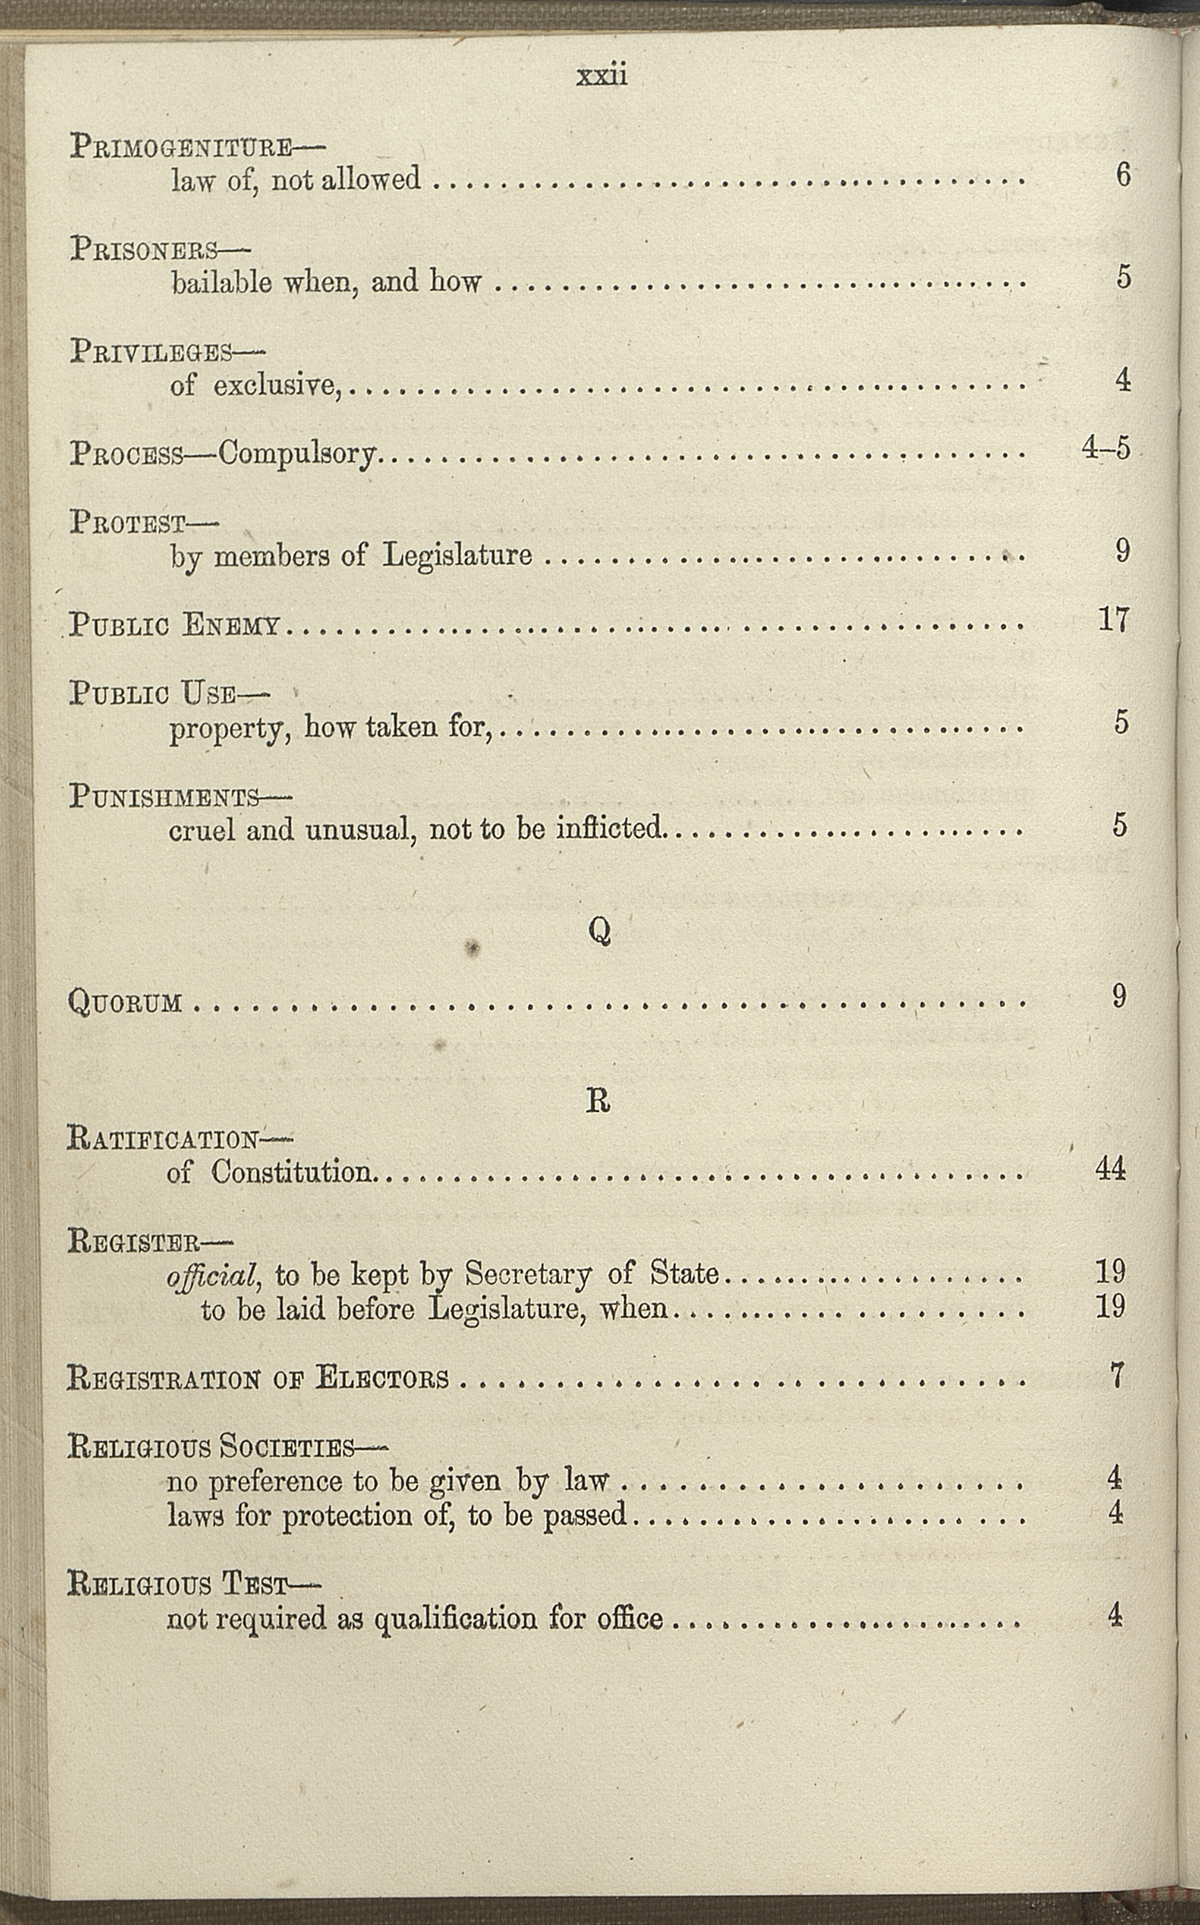 page 22 - 1869 index